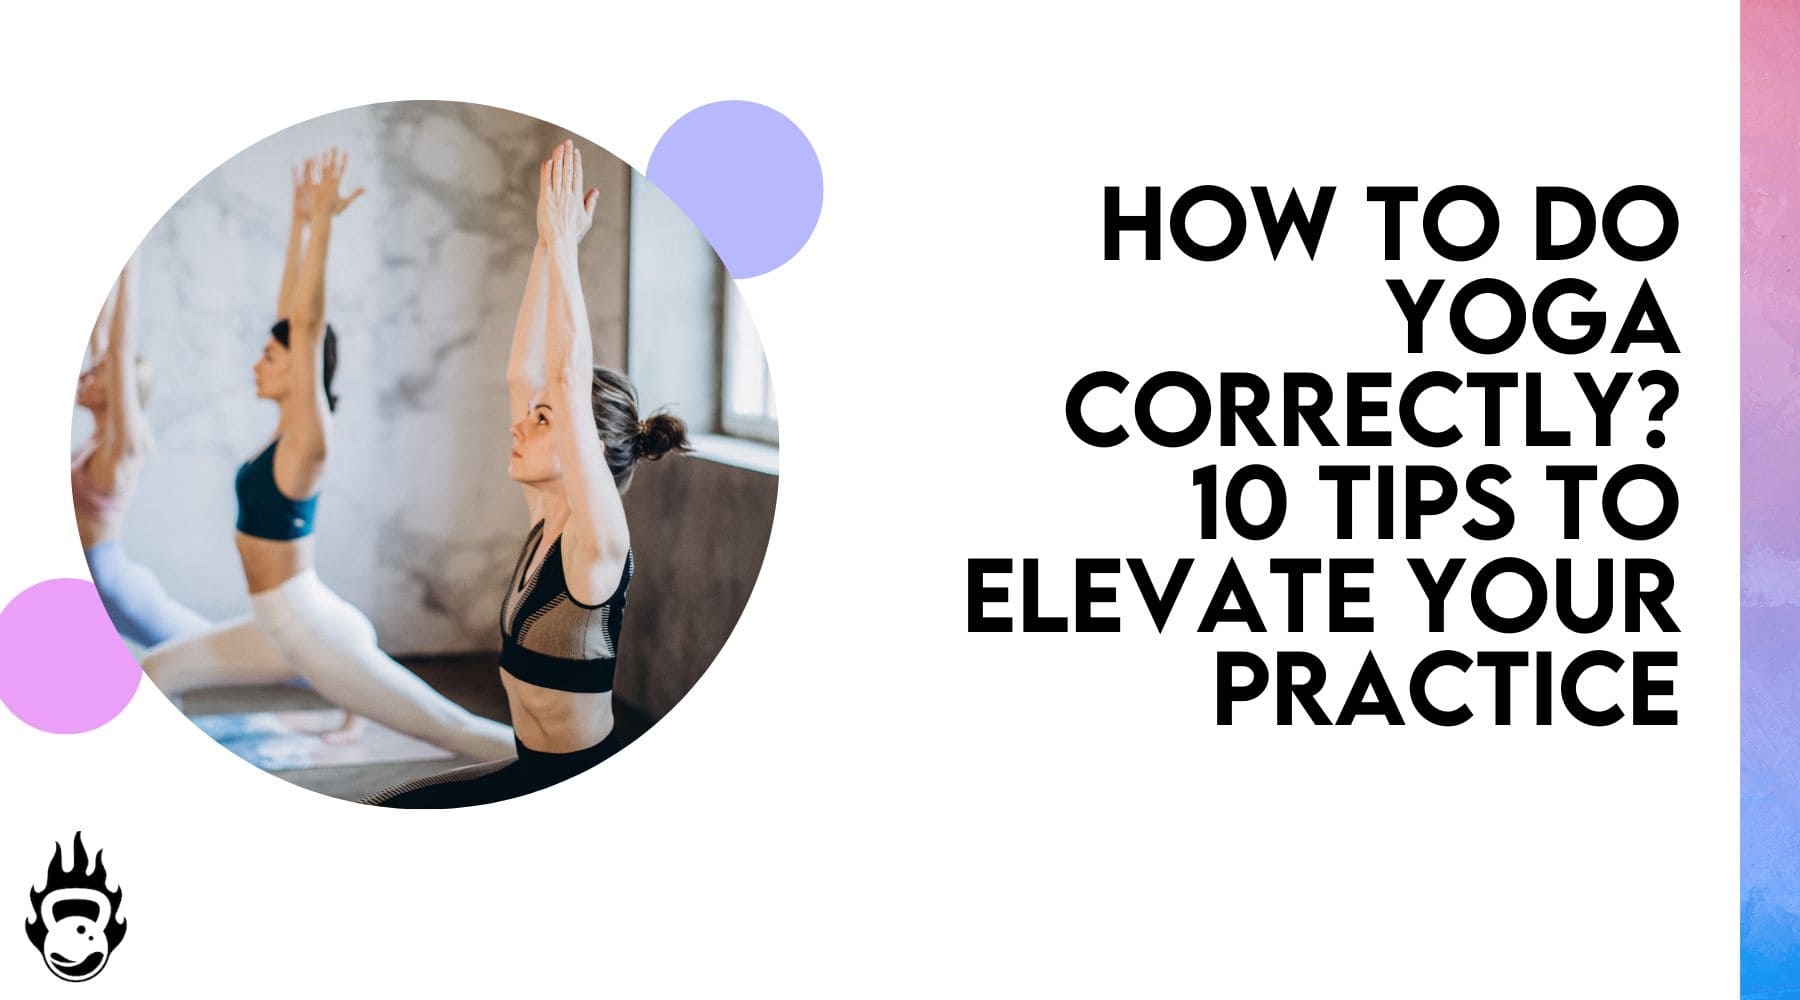 How To Do Yoga Correctly? 10 Tips To Elevate Your Practice